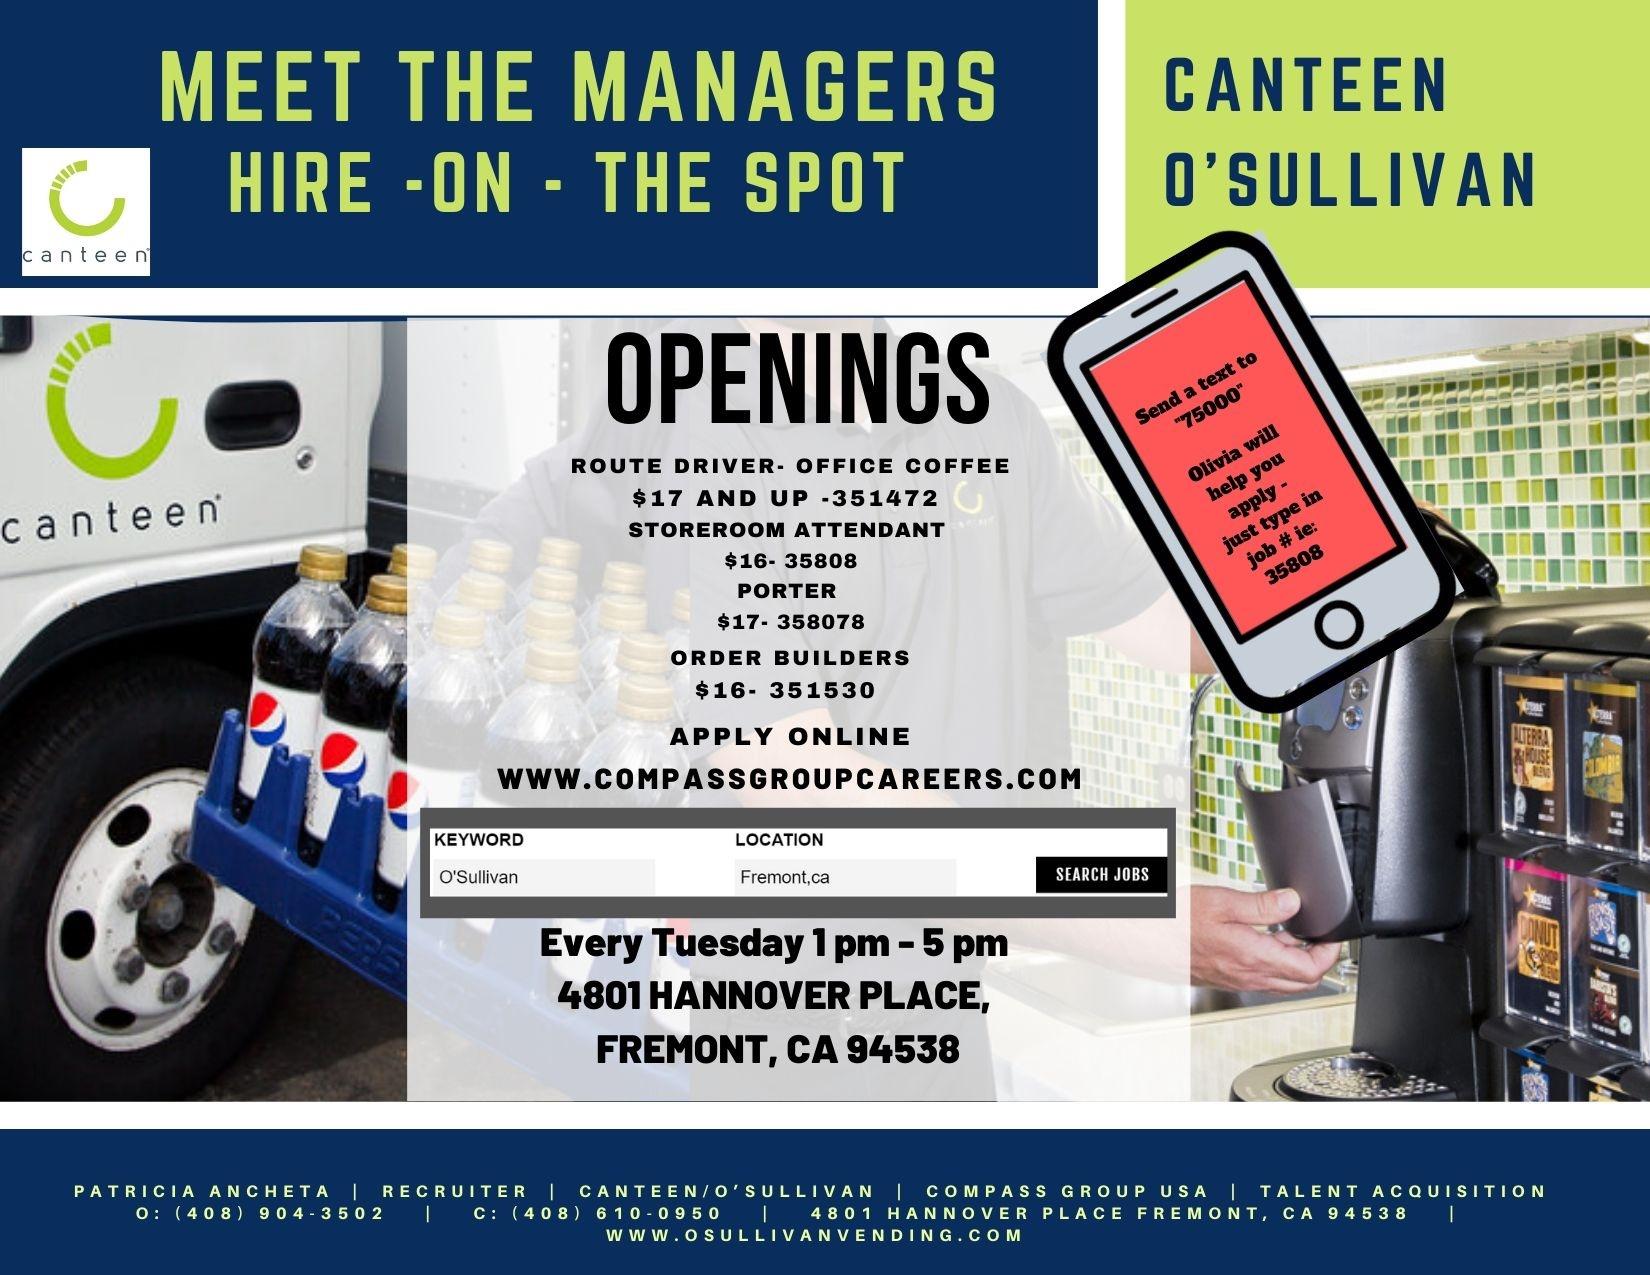 Meet - The - Managers- Canteen